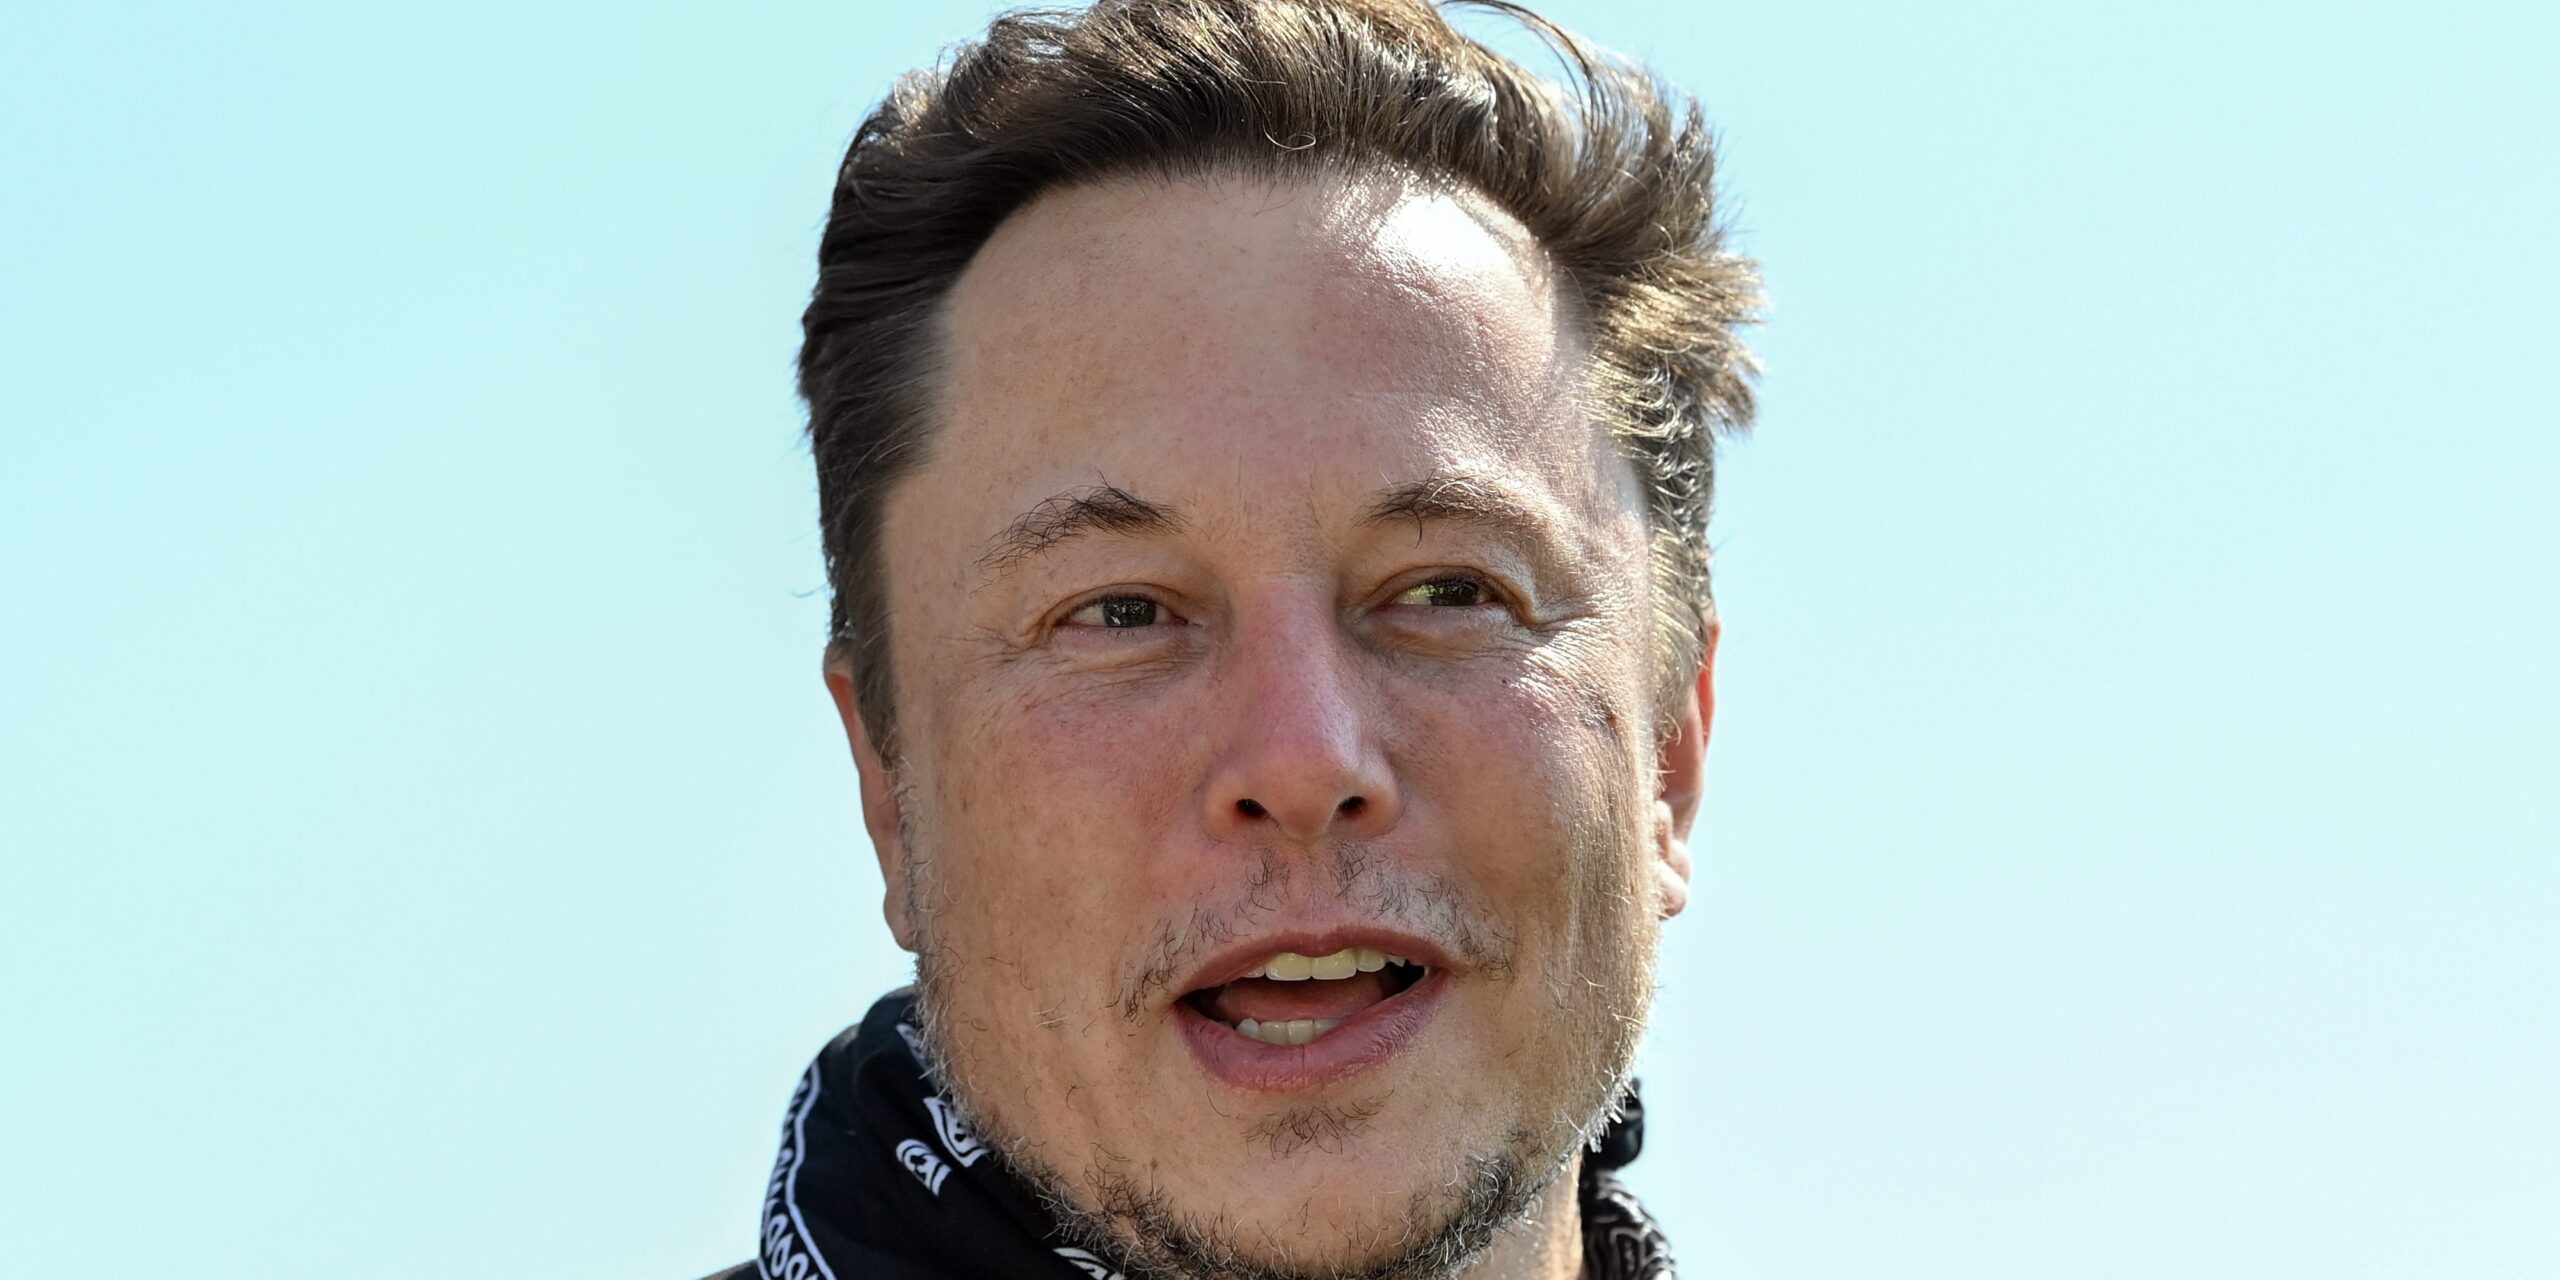 I tried Elon Musk’s productivity hack of breaking my entire day into 5-minute slots. It was annoyingly inflexible – but I got a lot more done.